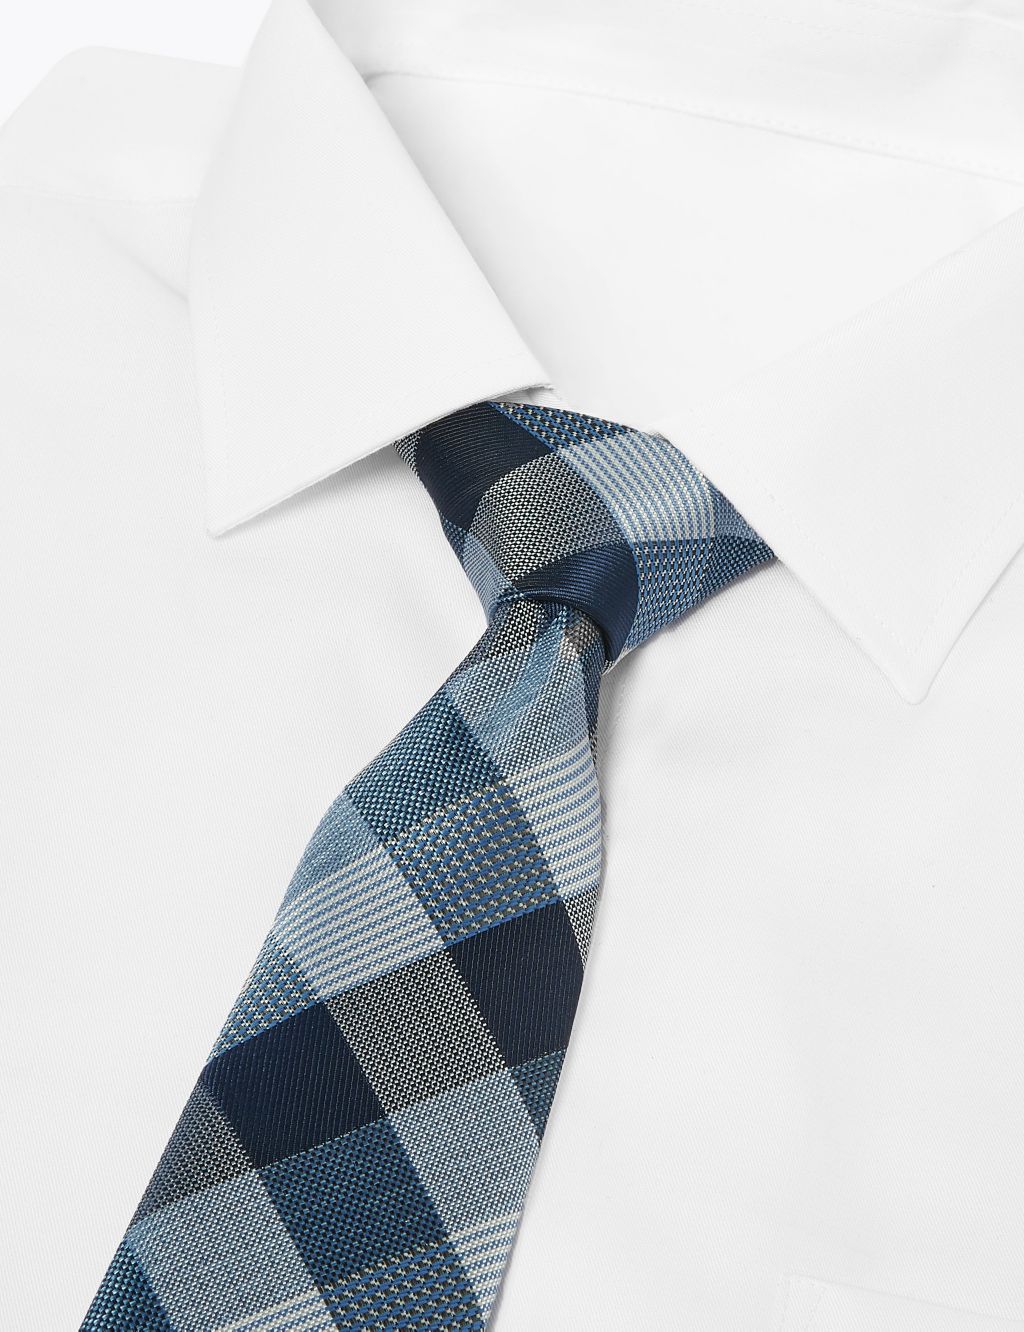 Slim Woven Blanket Check Tie | M&S Collection | M&S